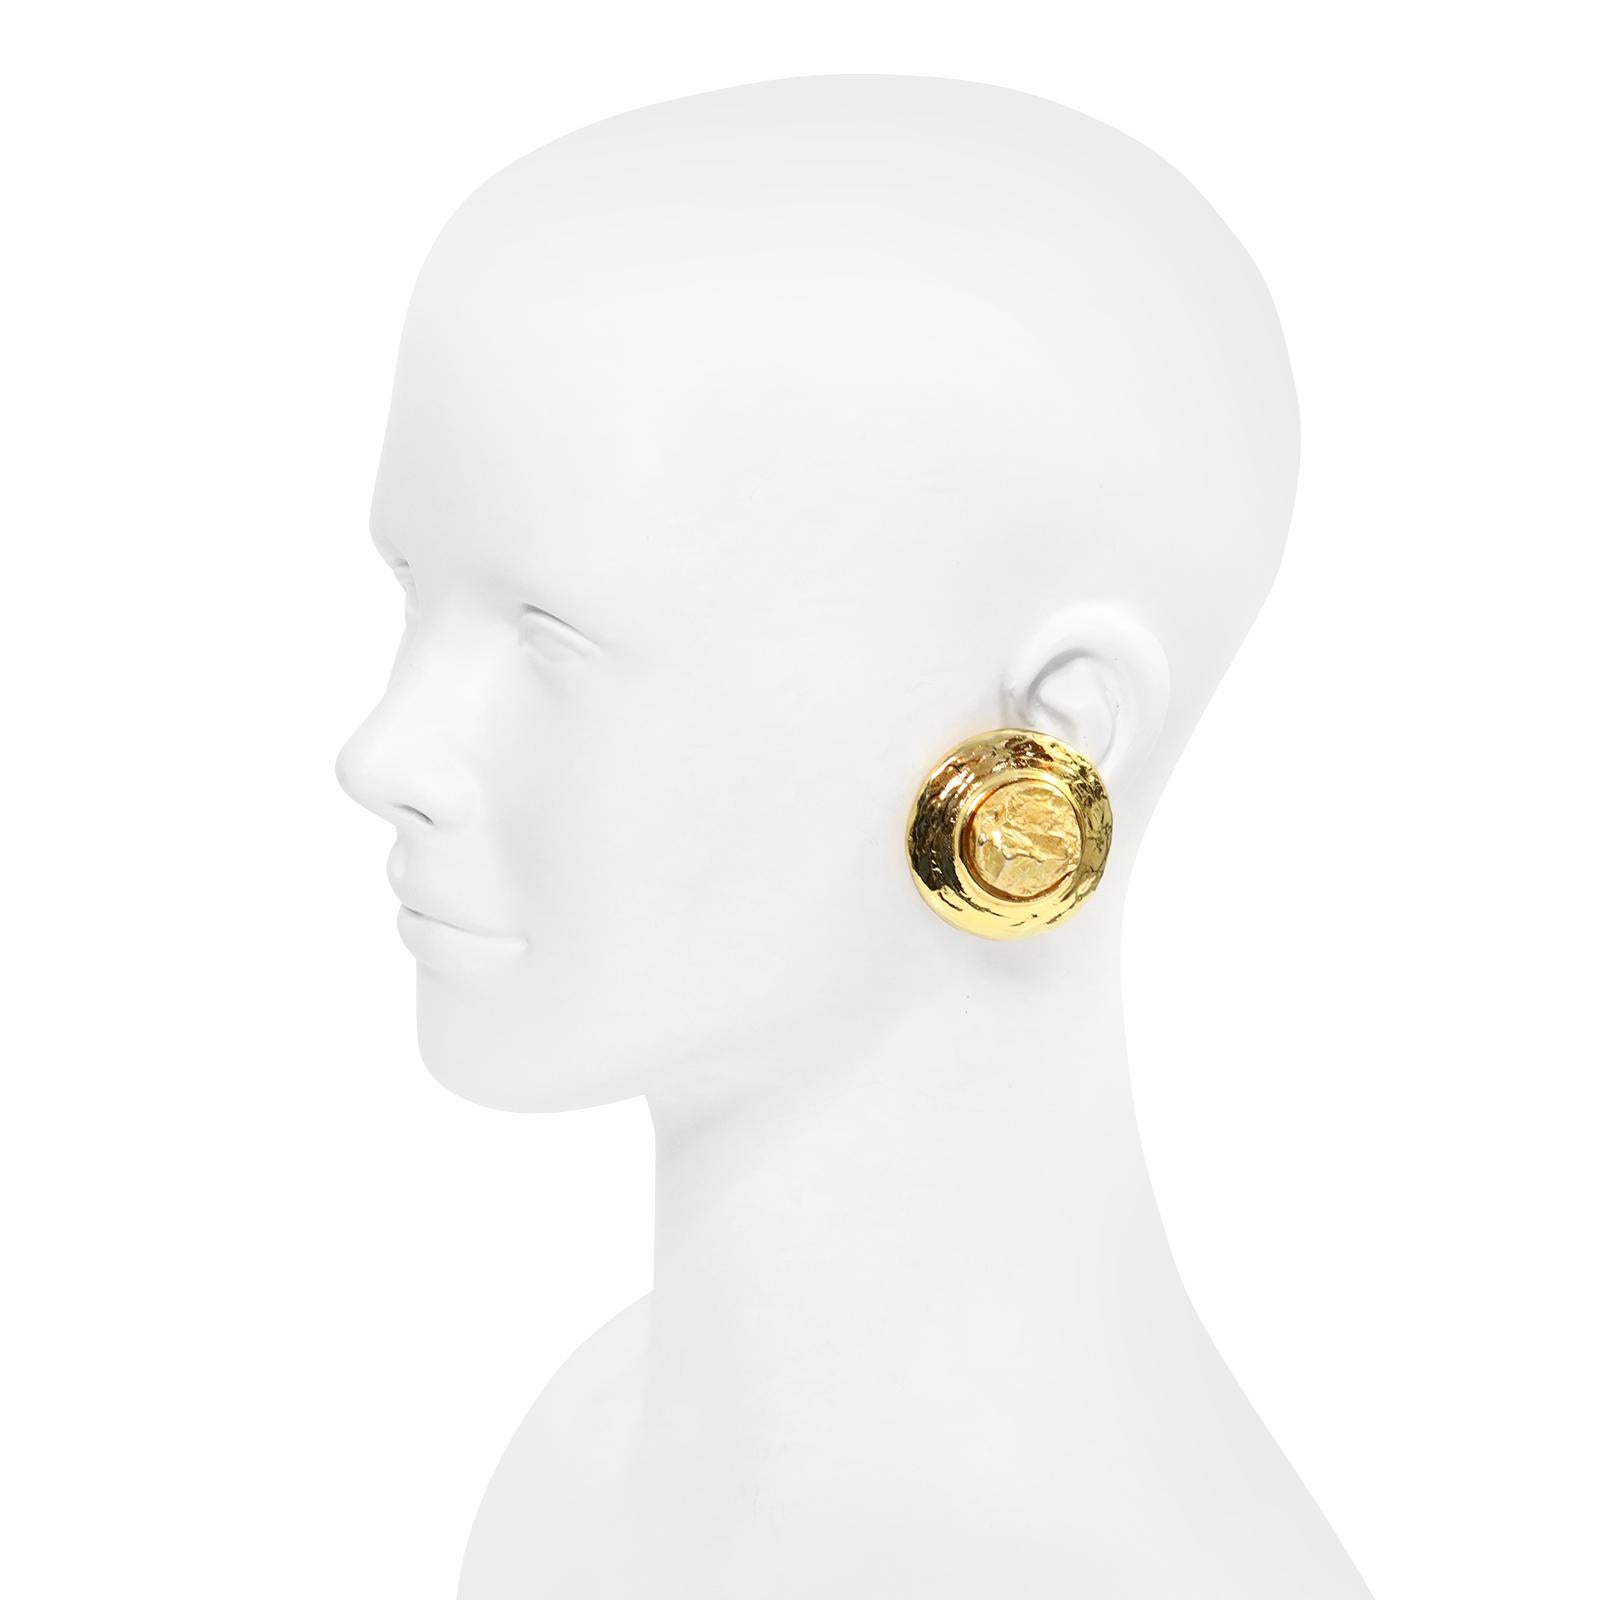 Vintage  Maison Goossens Yves Saint Laurent YSL Gold Tone Earrings.  Clip On.  These are Matte and Shiny. Have a 3D Appearance as they are Elevated on the top. There is a Bracelet and Necklace on Site.  I'm not a Mixey and  Matchy Person but when